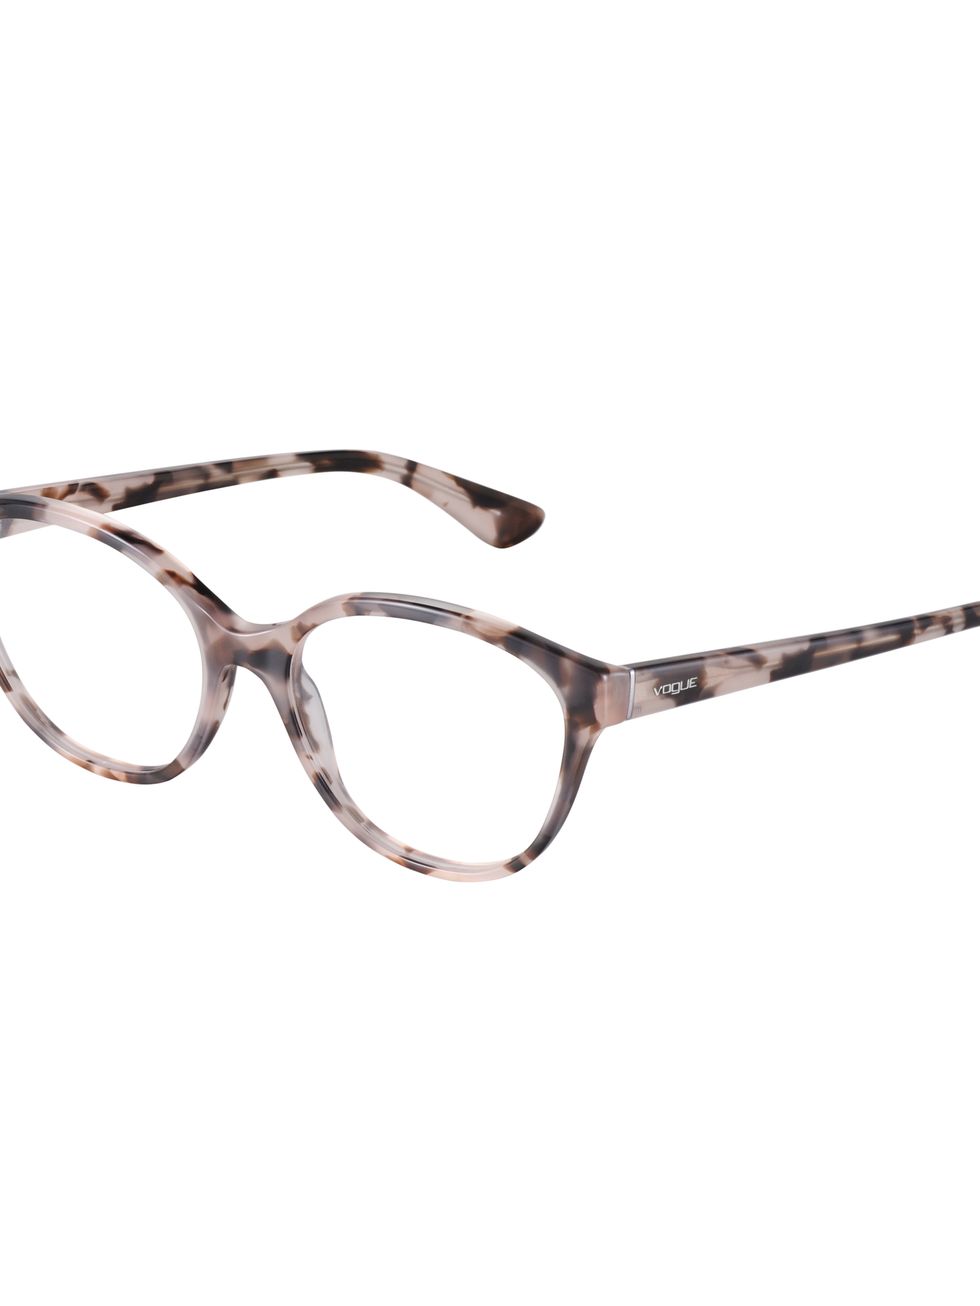 Eyewear, Vision care, Brown, Beauty, Eye glass accessory, Transparent material, Metal, Tan, Office instrument, Silver, 